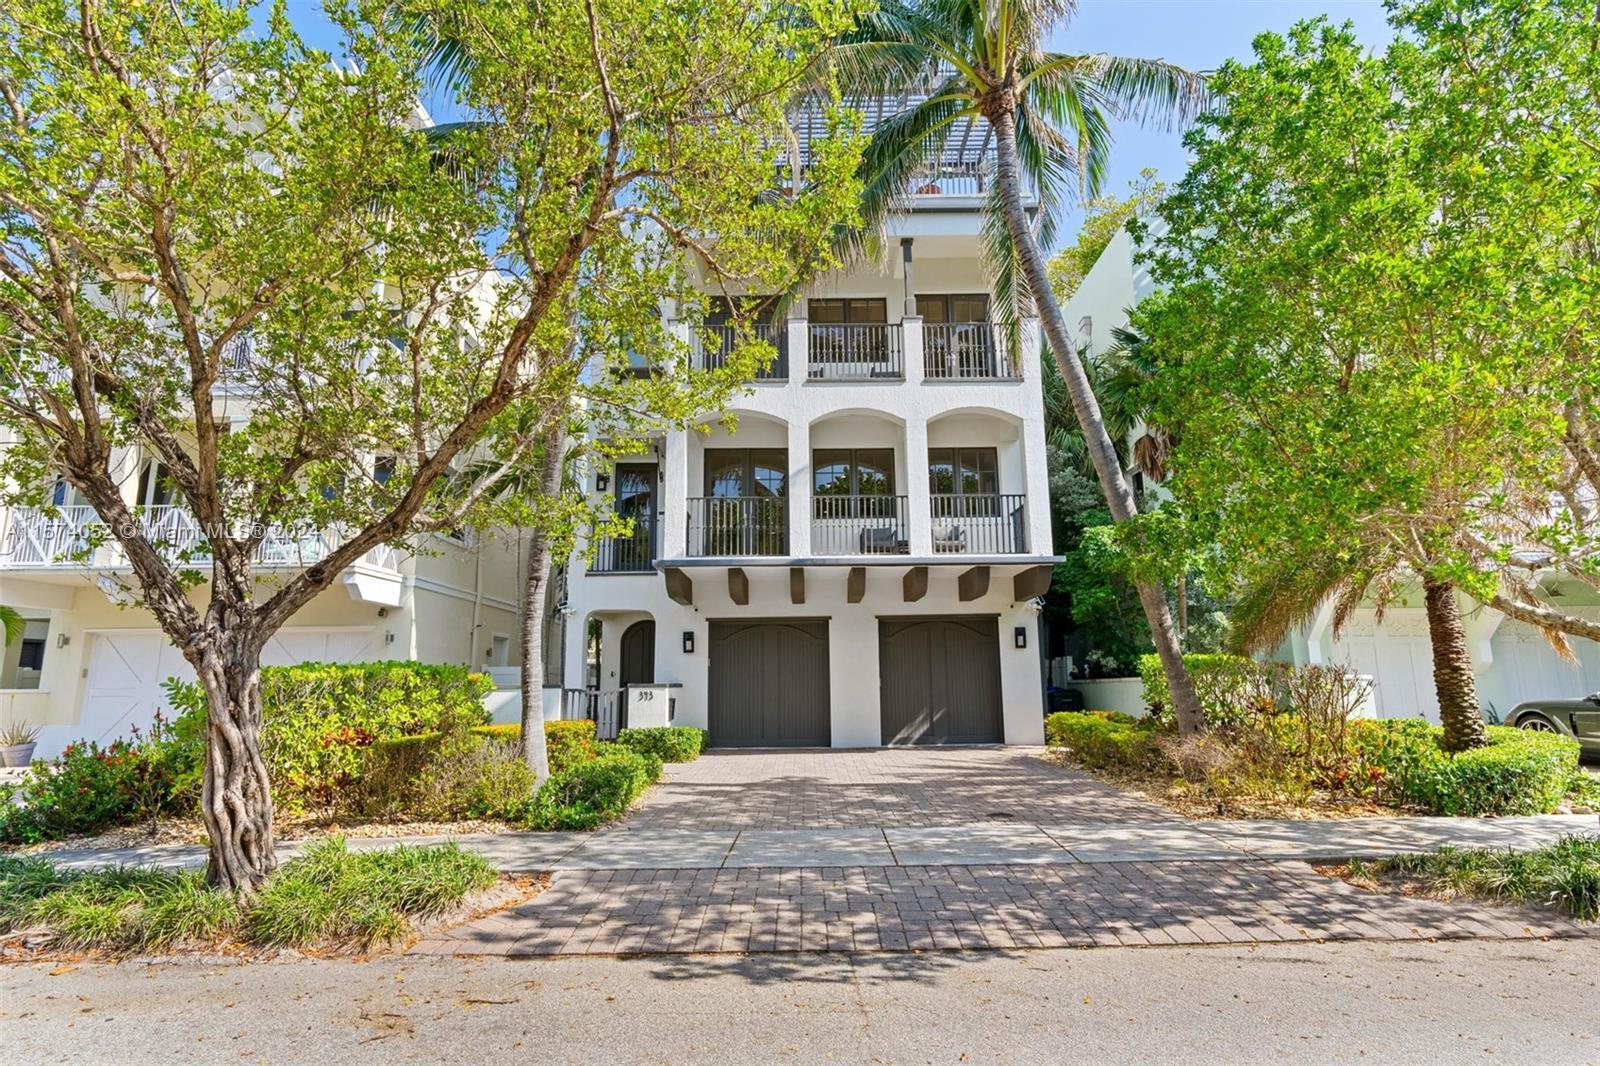 Photo of 343 Franklin St in Hollywood, FL